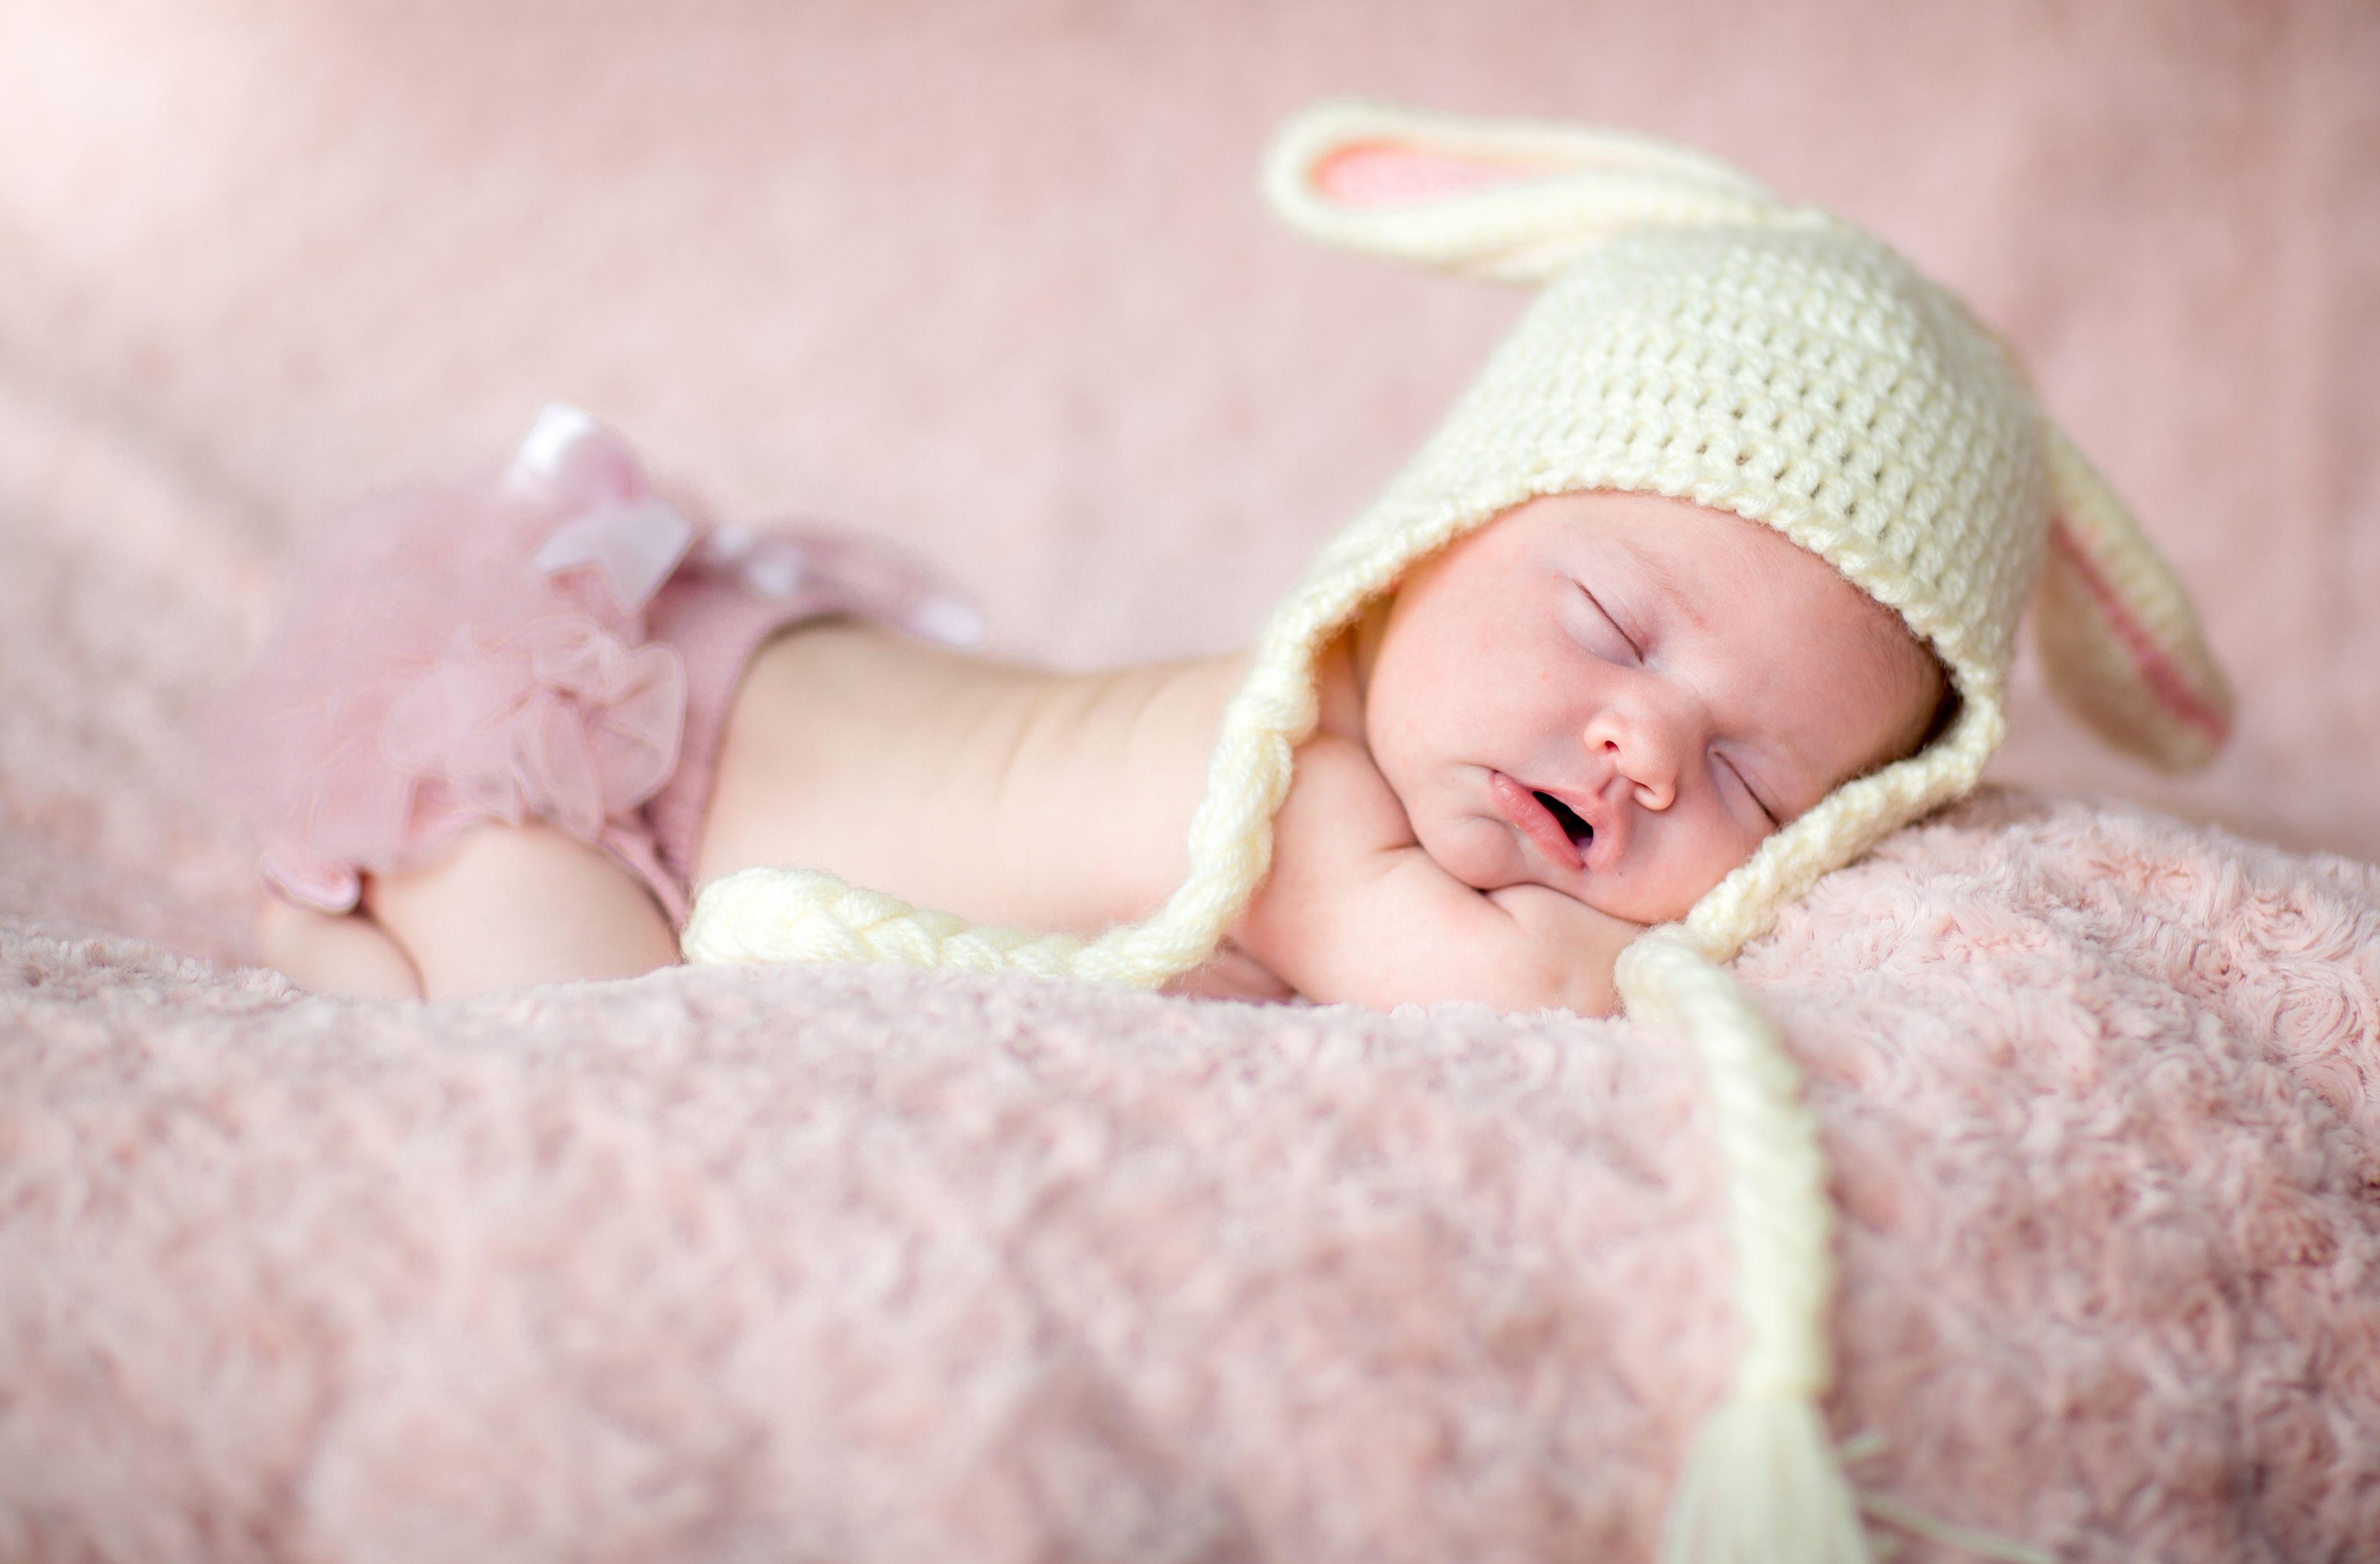 cute newborn baby girl sleeping picture on pink carpet Download